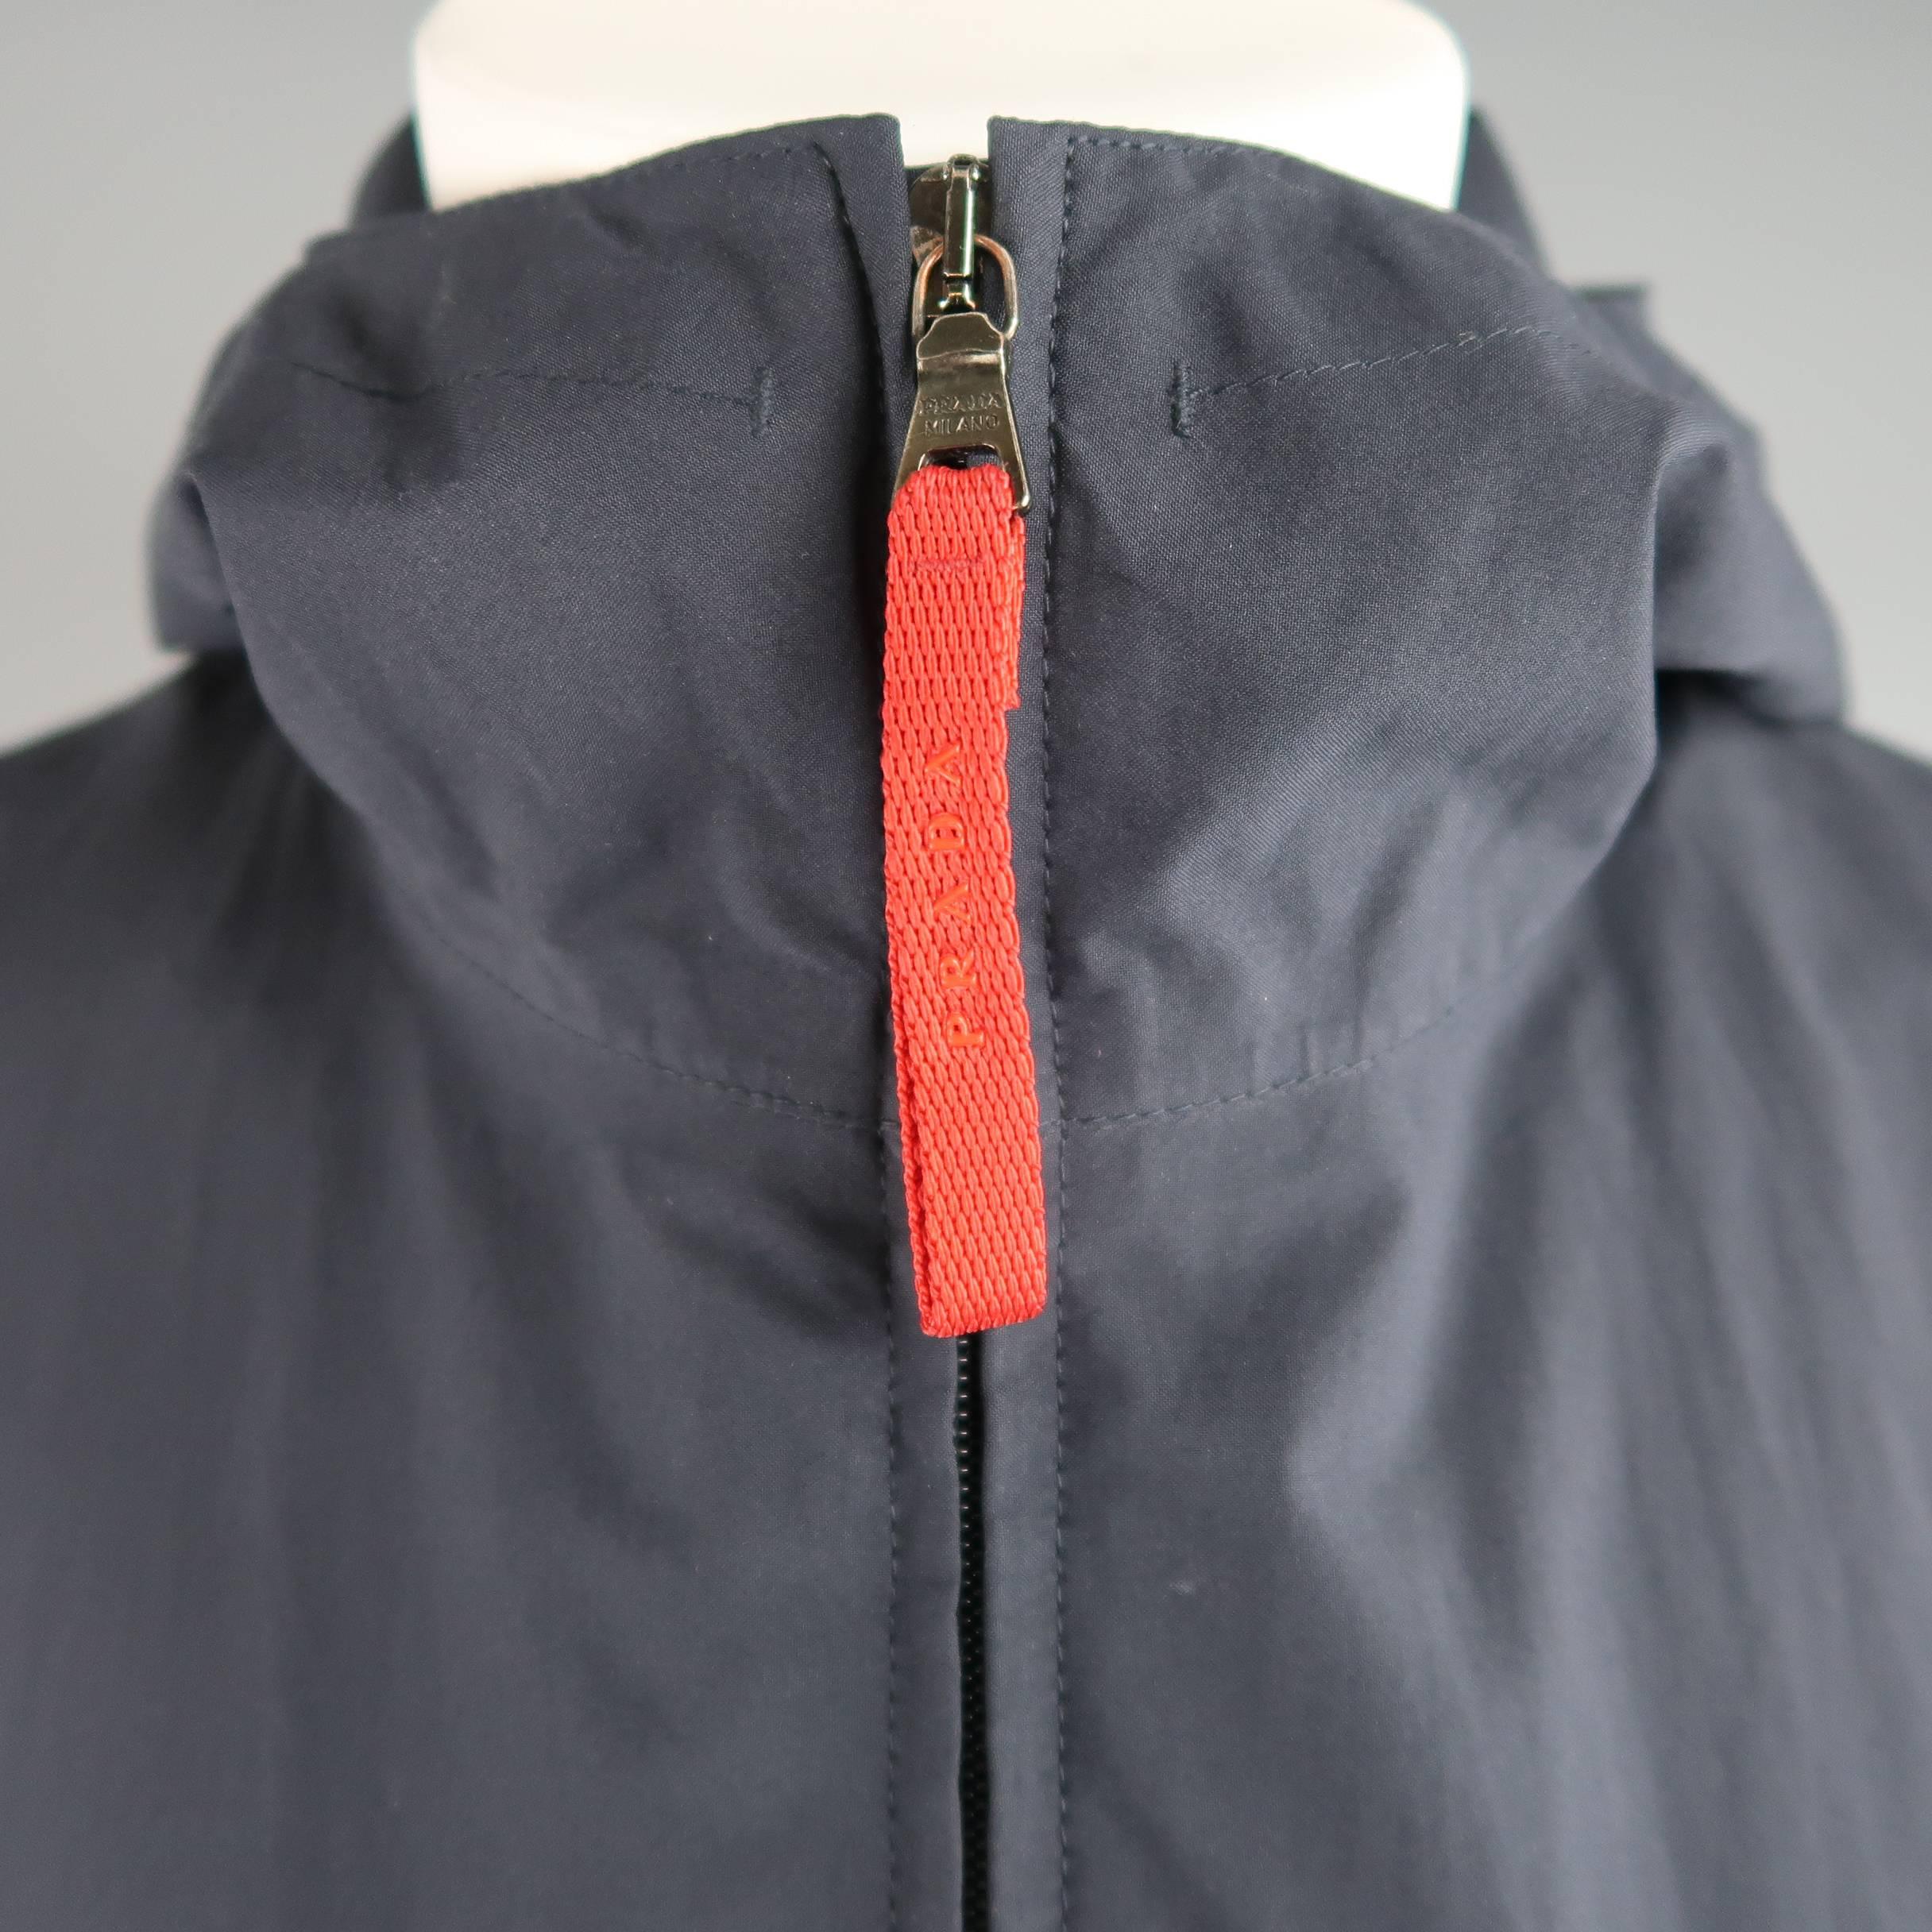 Classic PRADA overcoat comes in a light weight navy blue nylon and features a high neck with hood, double zip with red logo tab, frontal zip pockets, black GORE-TEX liner with extended stretch cuffs, and back zip pockets. Made in Italy.
 
Good